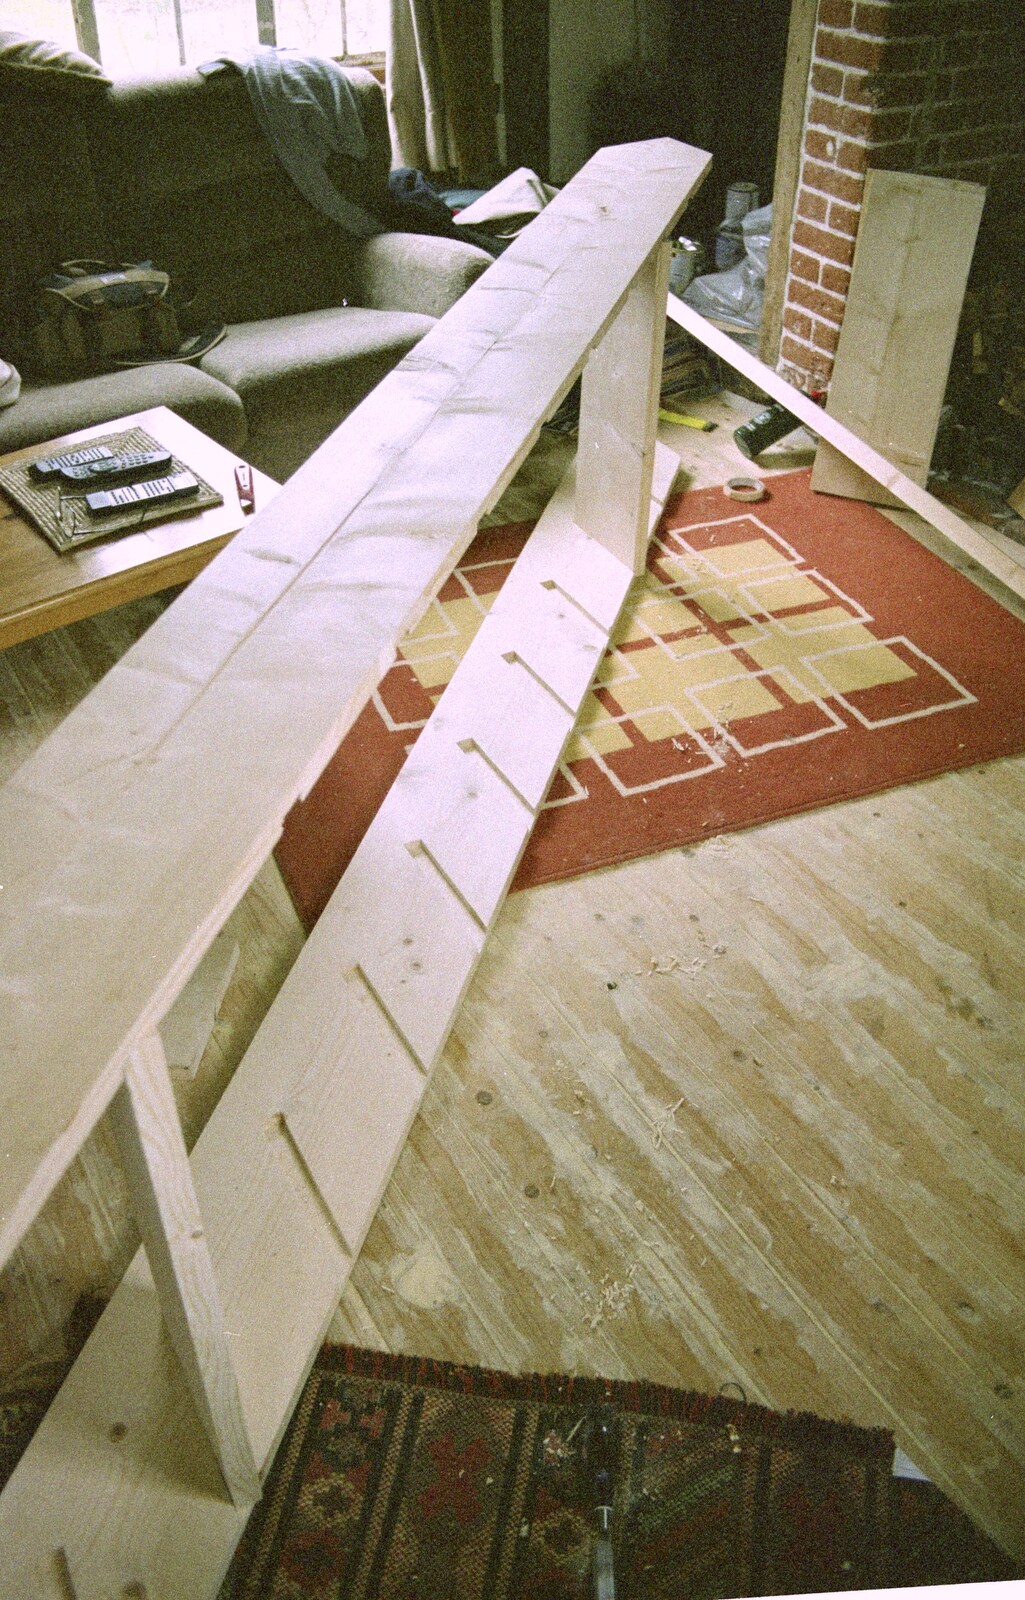 The new staircase takes shape from 3G Lab, and Building a Staircase, Brome, Suffolk - 11th February 2001